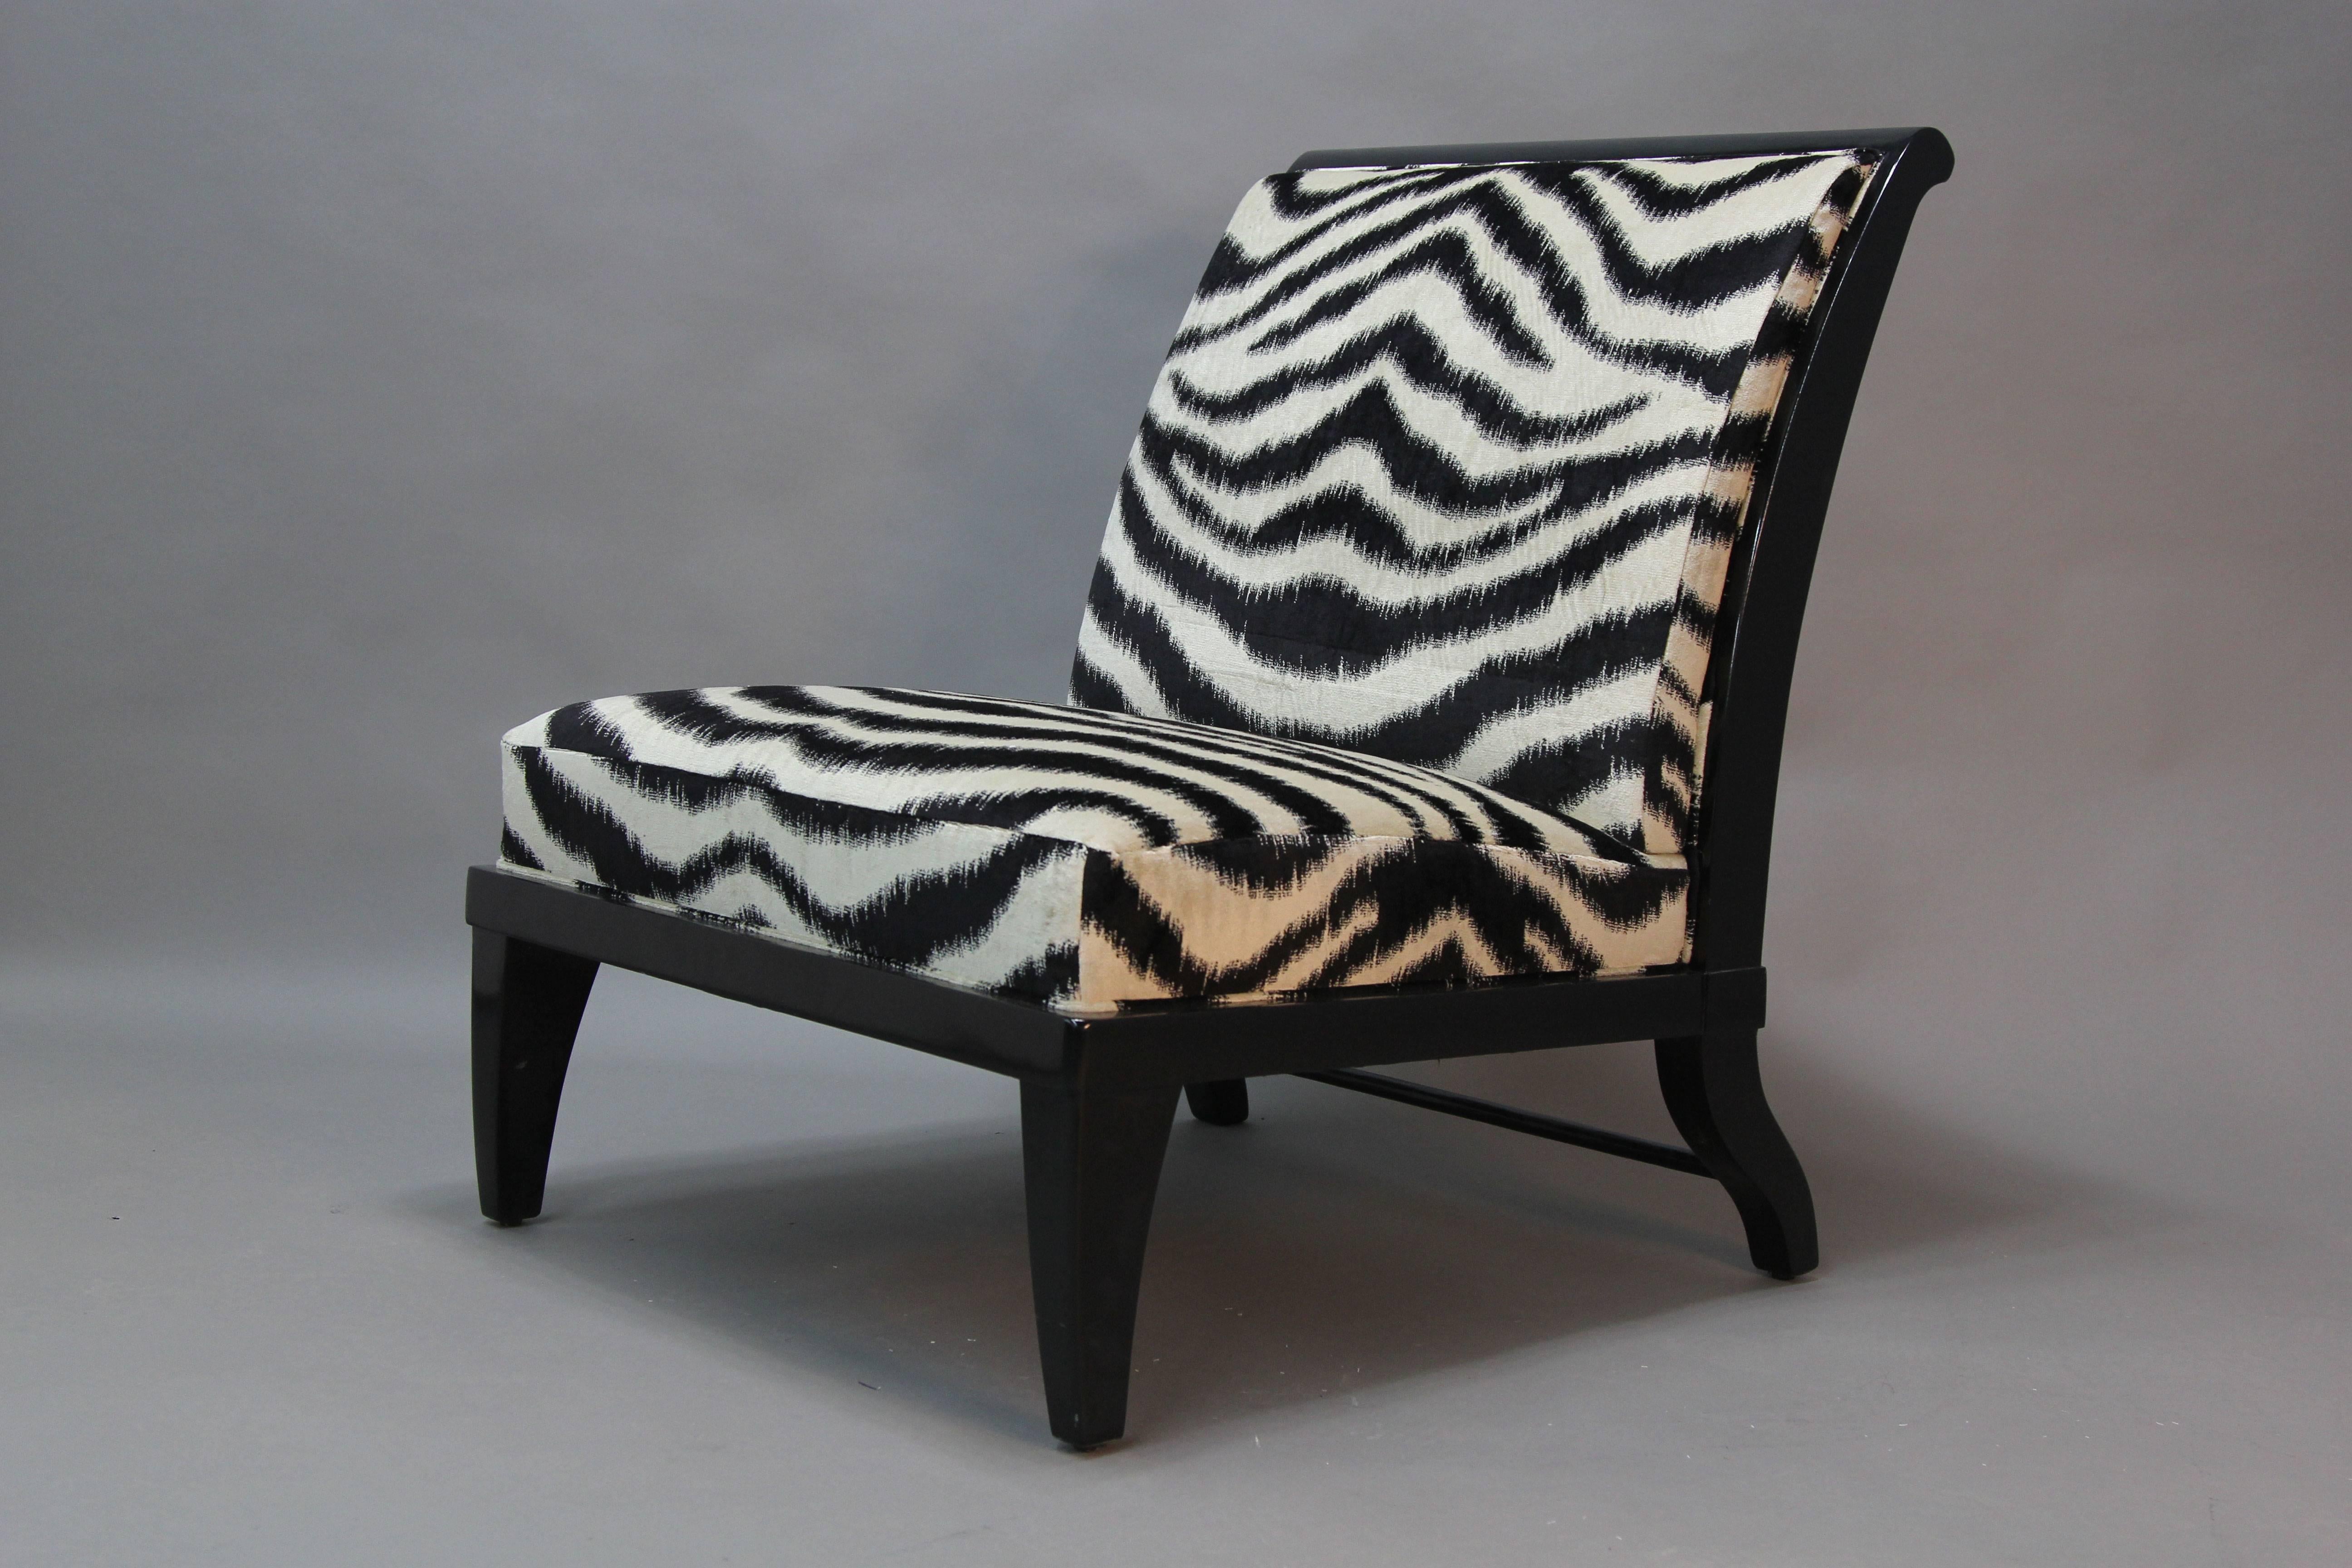 Holly Hunt wood frame slipper chairs with new very high end upholstery. Zebra style striping.